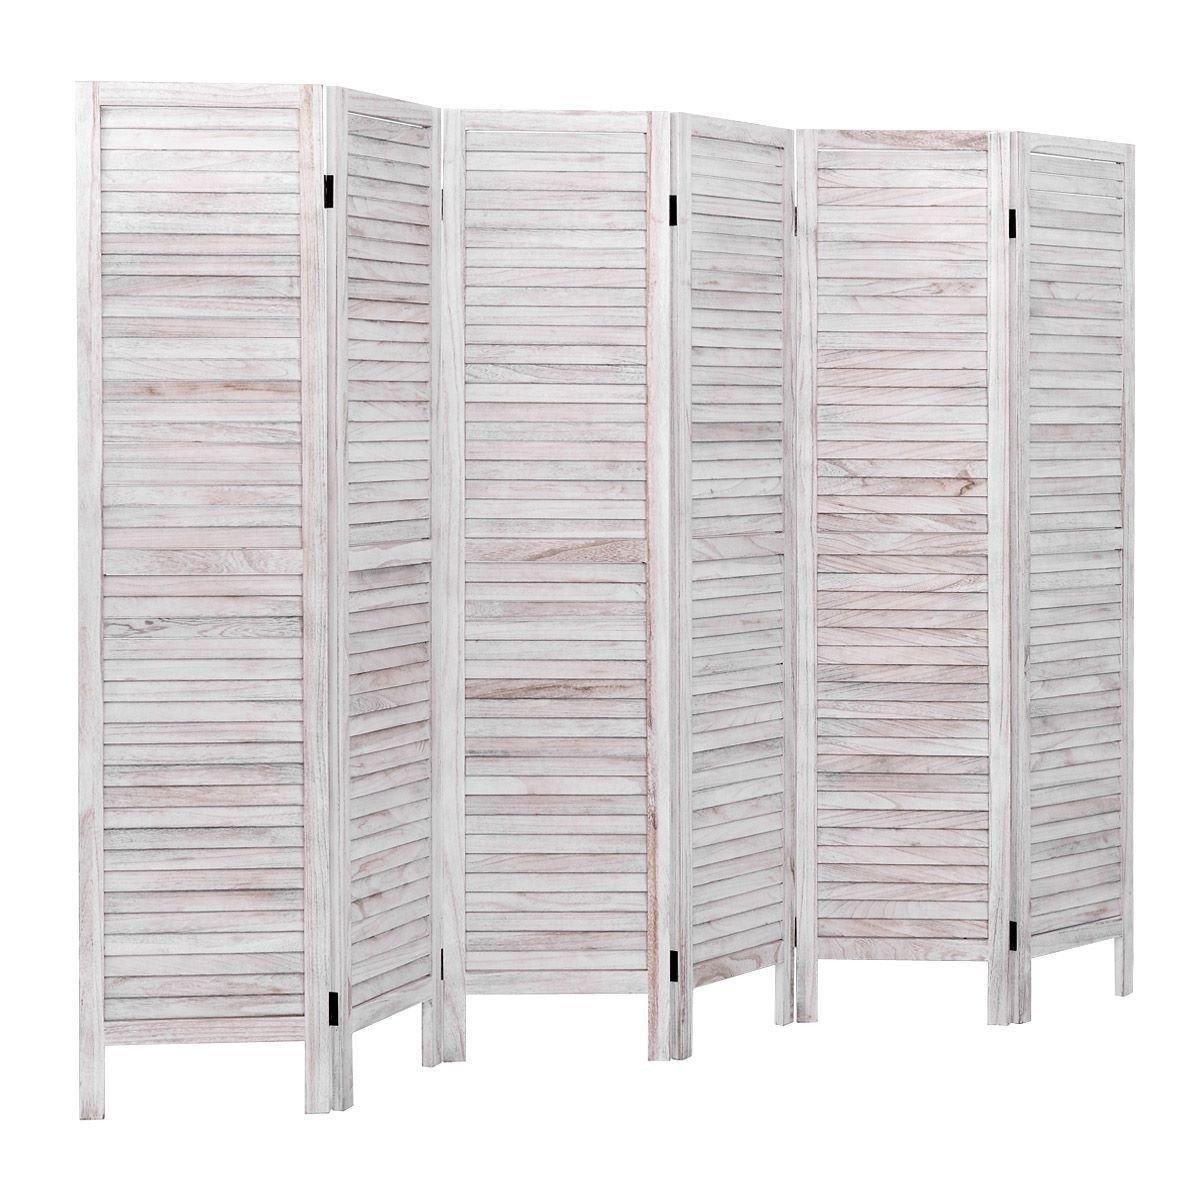 6 Panel Room Divider Wooden Screen Wall Folding Room Partition Separator Privacy - image 1